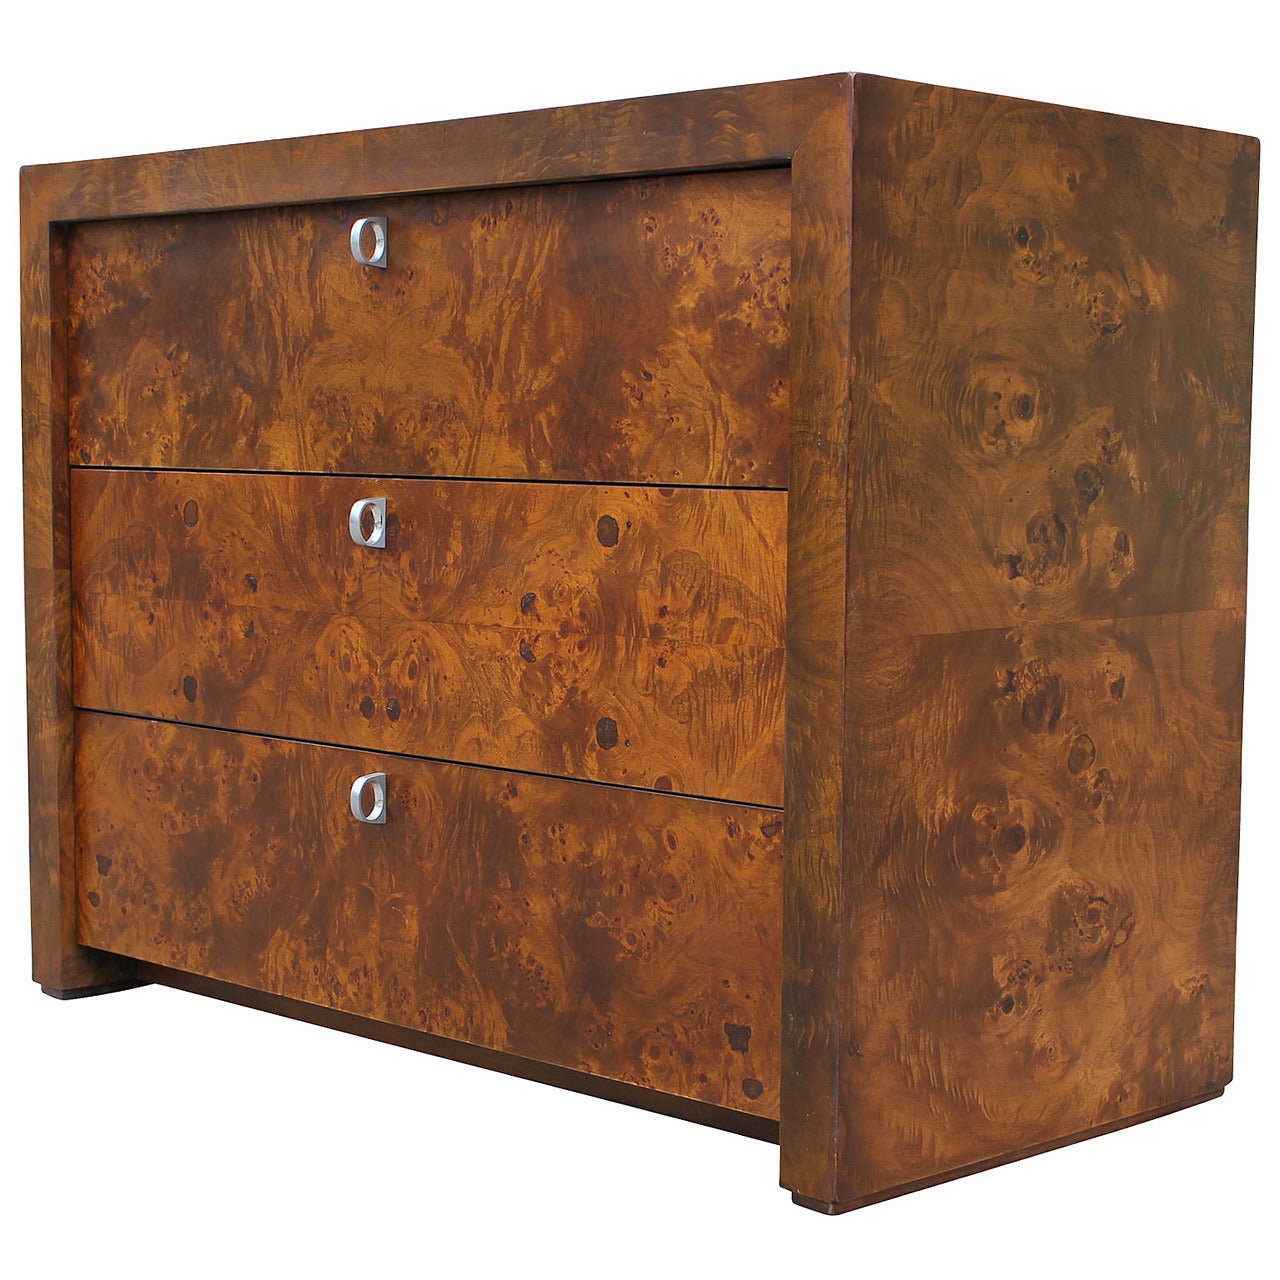 Three-Drawer Burl Chest with Ring Pulls